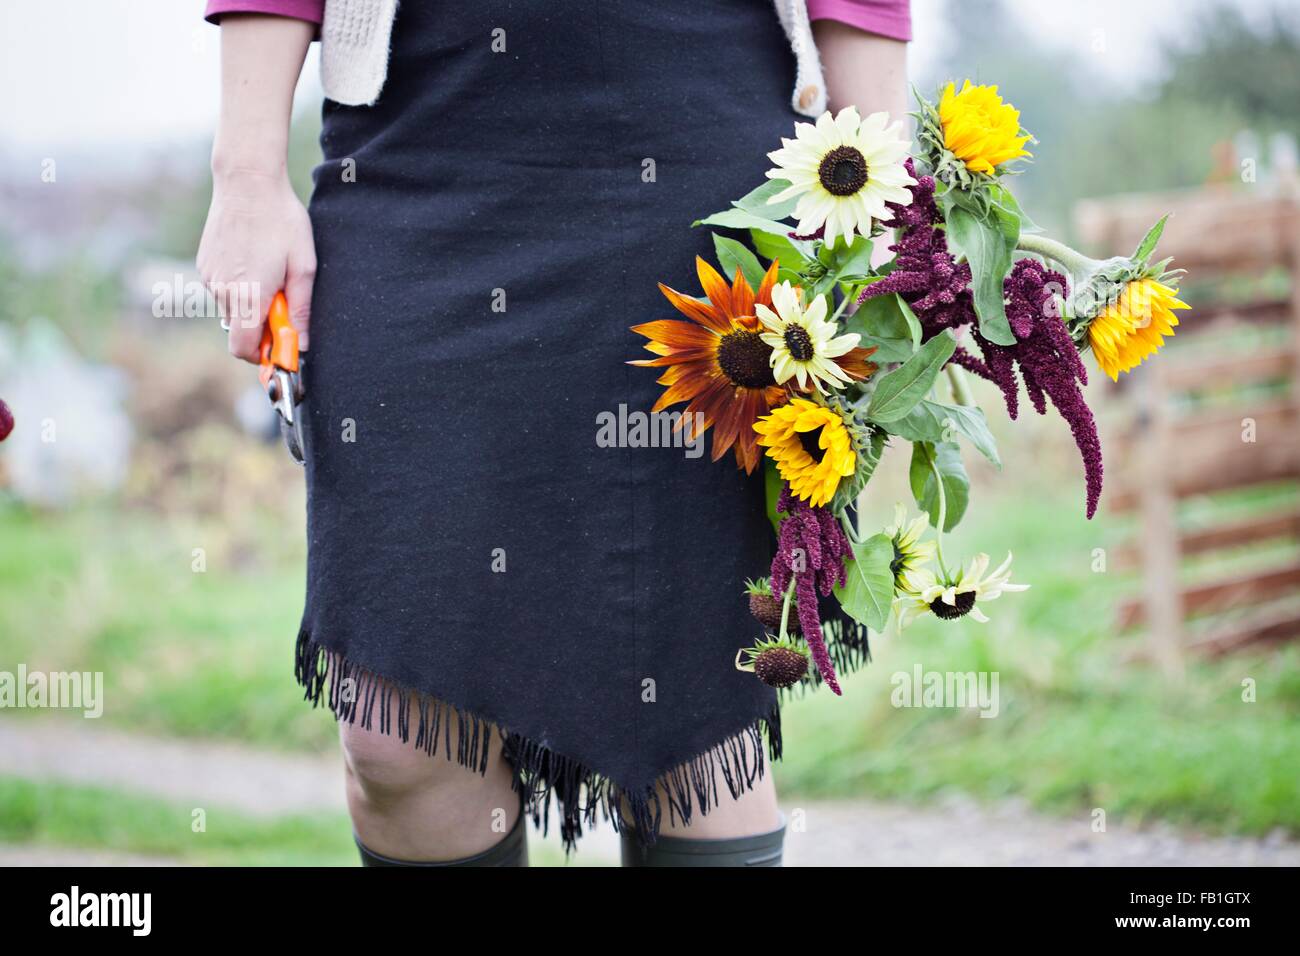 Waist down view of woman cutting fresh flowers at allotment Stock Photo